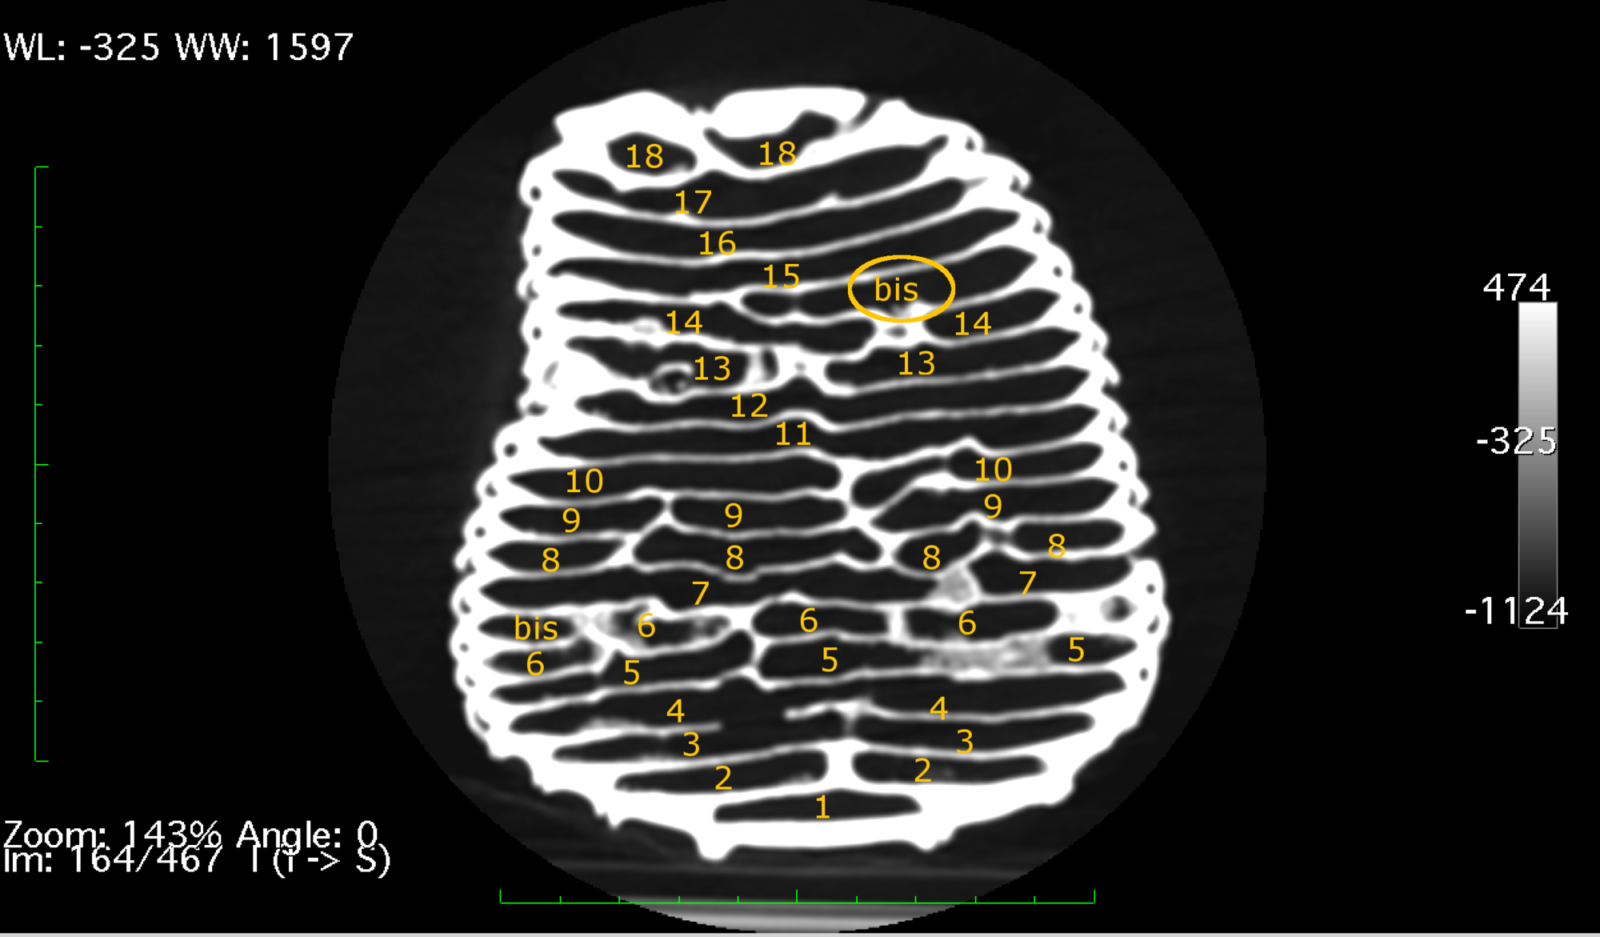 Apicotermes nest (probably Apicotermes lamani). The numbers highlight the different layers inside the nest. The appearance of helicoidal ramps corresponds with the formation of intermediate (bis) layers.